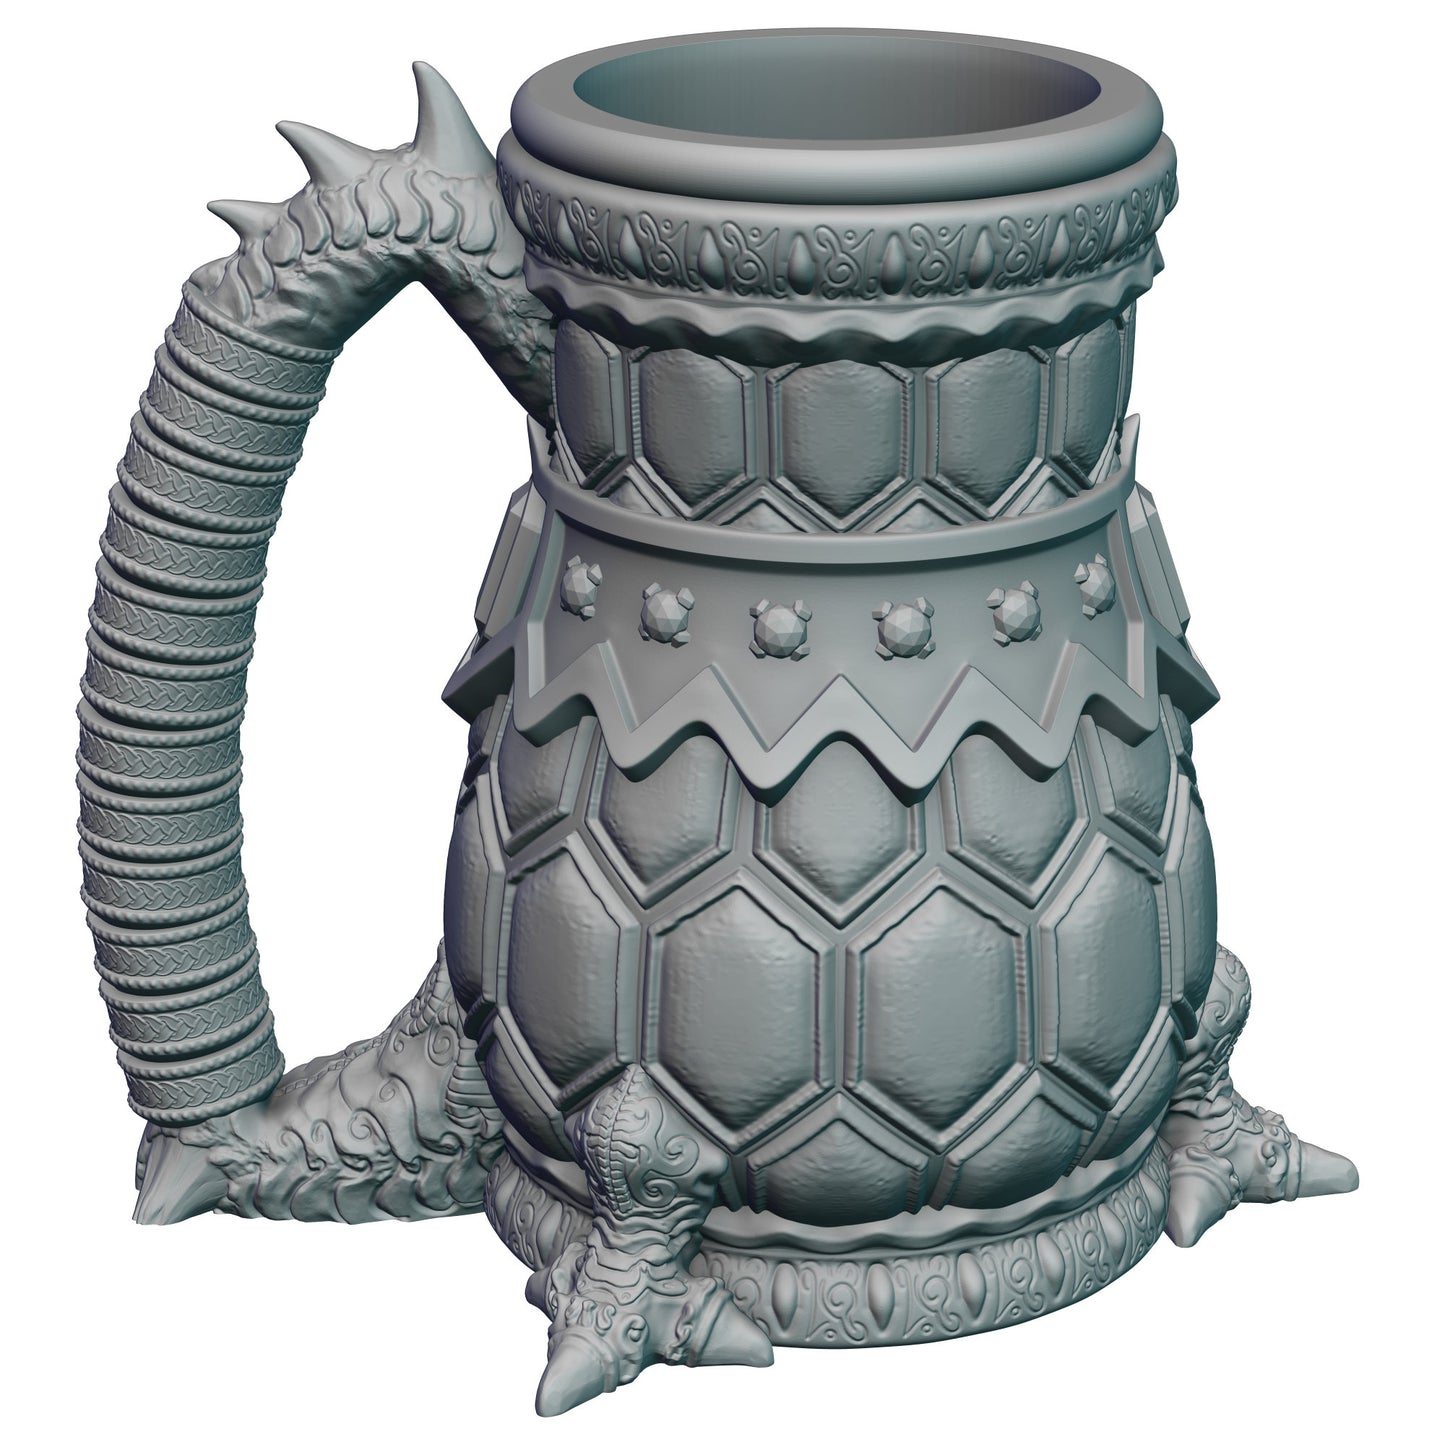 Dragon-Blooded 3D Printed Mythic Mug Stein | Tabletop RPG Gaming Cosplay - Dungeons and Dragon DnD D&D Wargaming | Koozie Can Holder